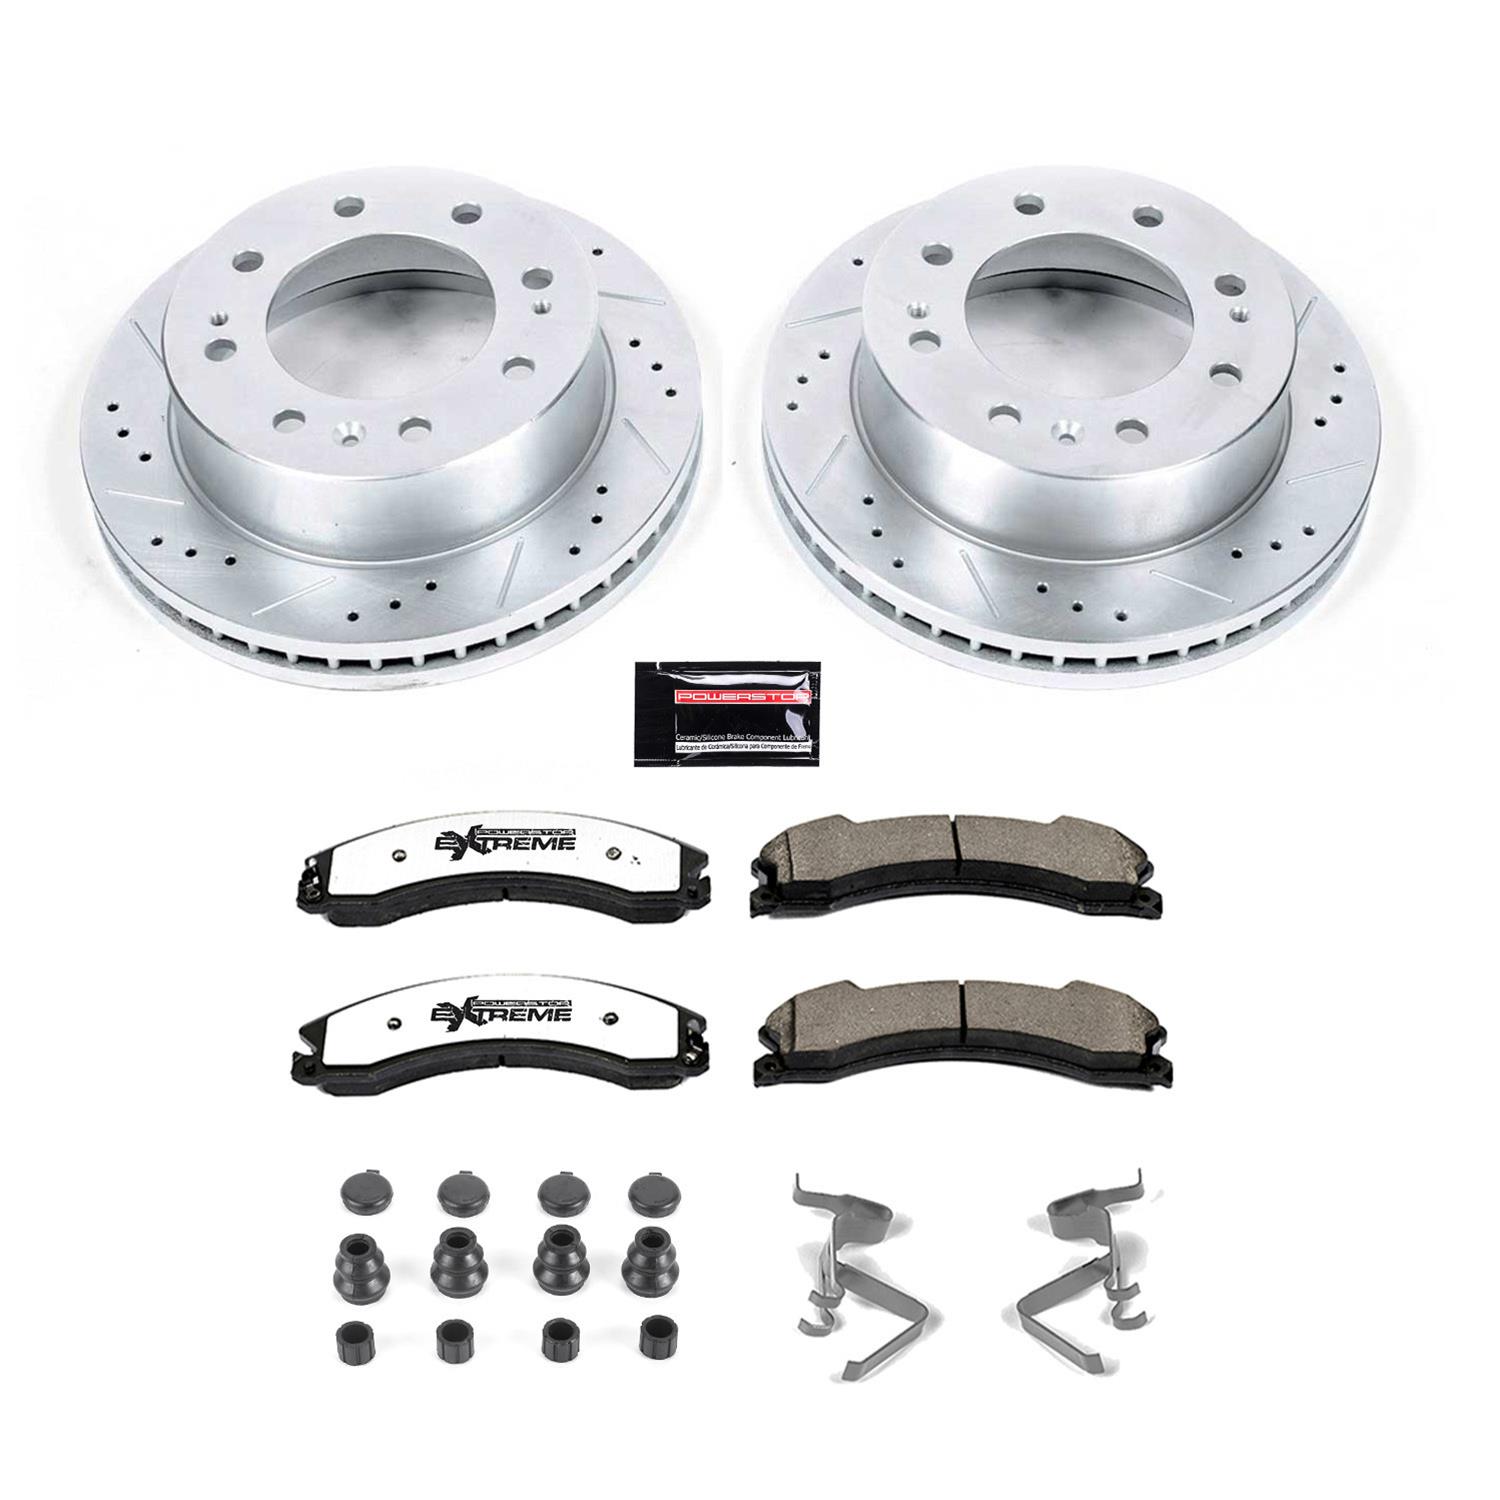 Power Stop K6258-36 Power Stop Z36 Truck and Tow Brake Upgrade Kits |  Summit Racing